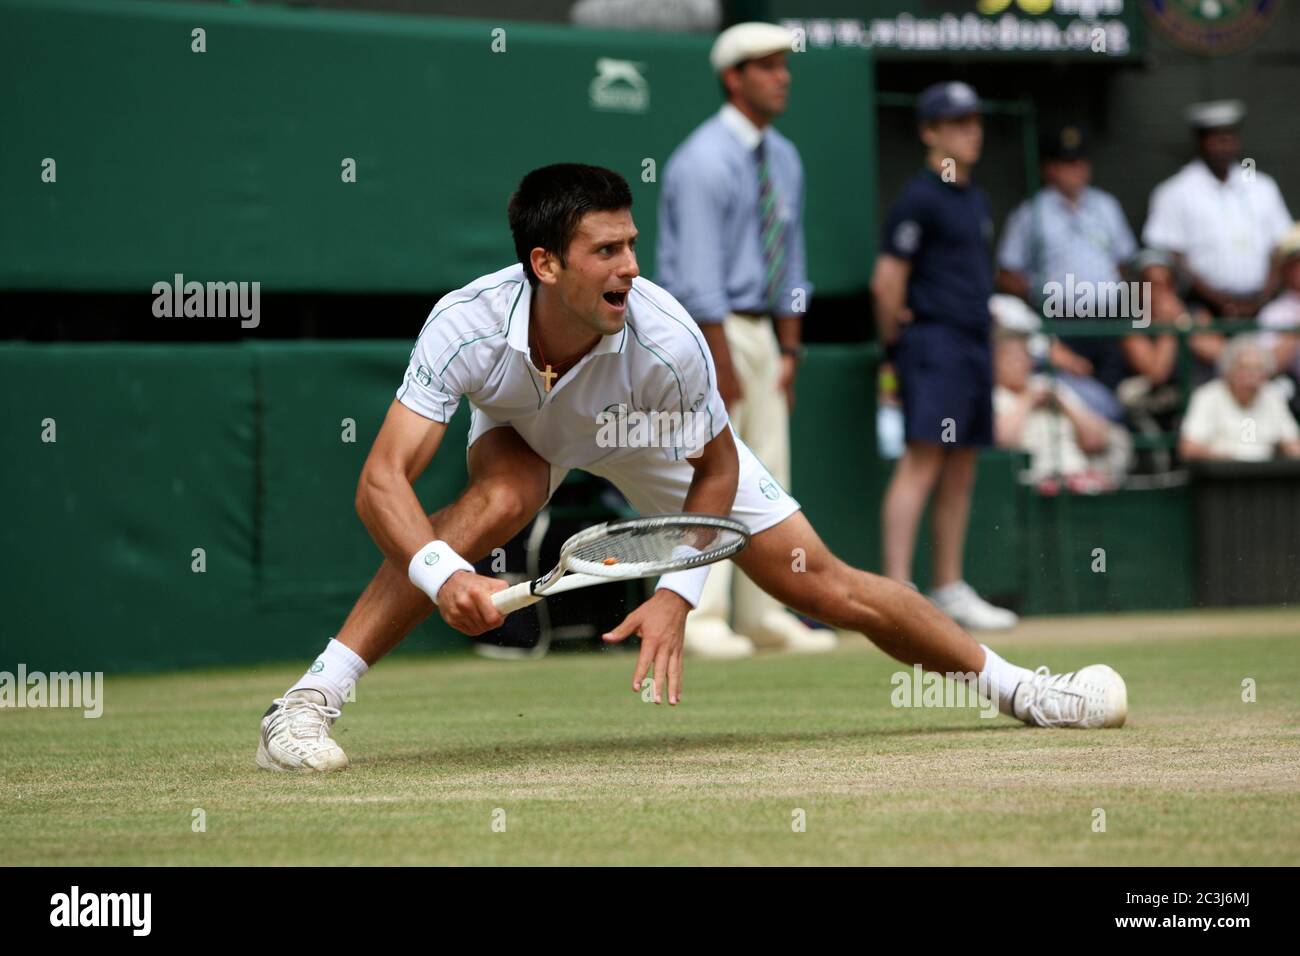 Novak Djokovic reaches wide for a forehand during his his semi-final match against Tomas Berdych at Wimbledon. Stock Photo